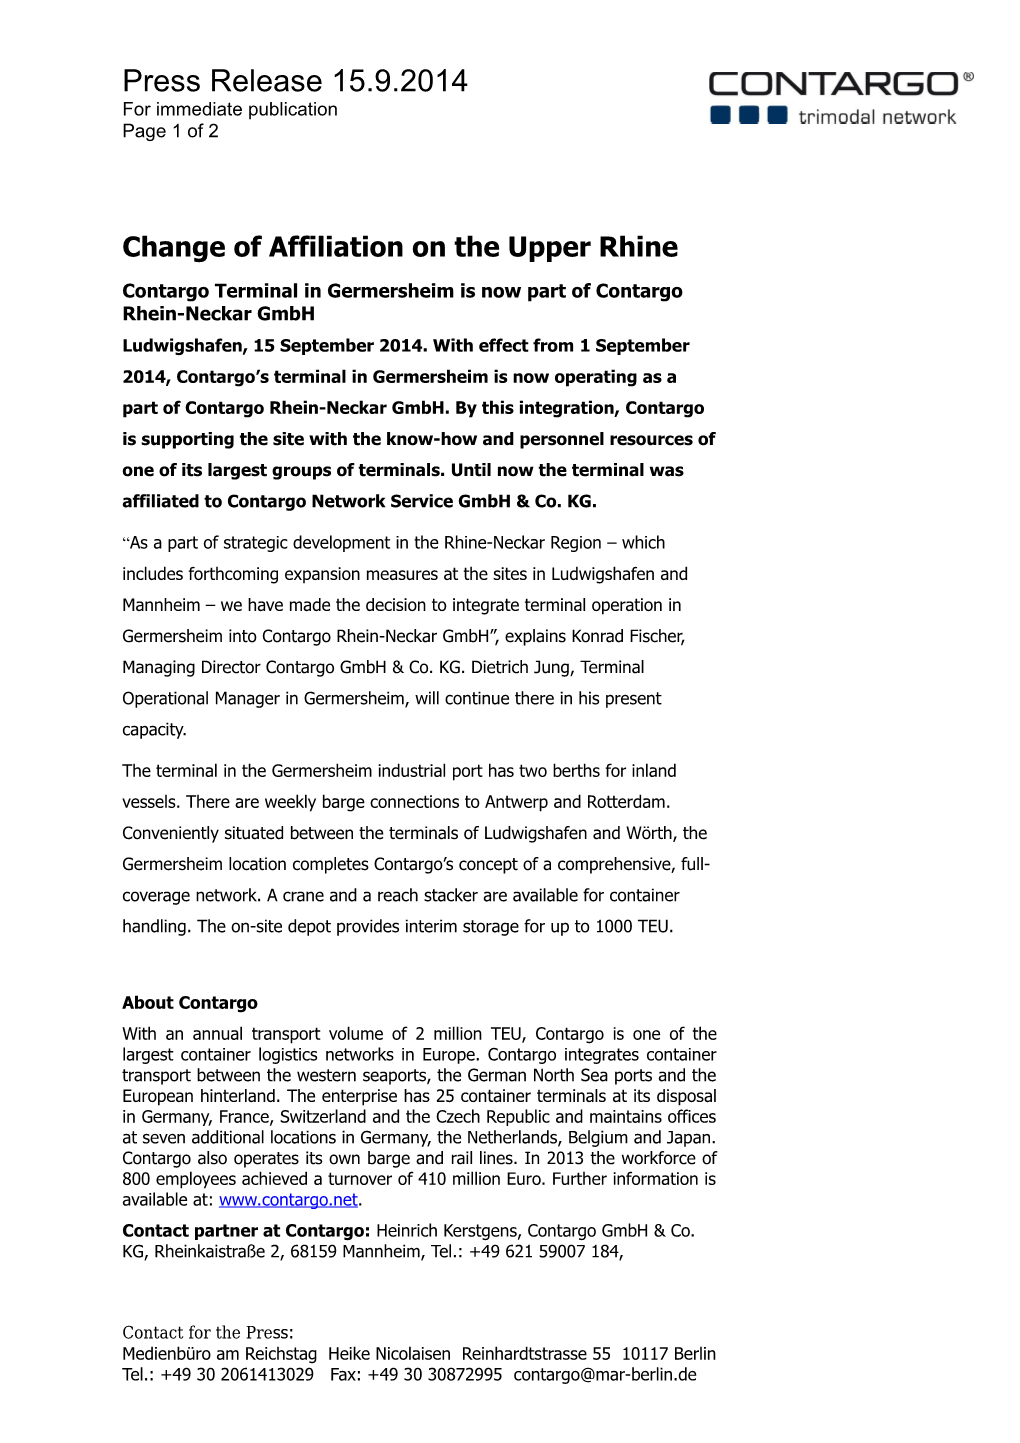 Change of Affiliation on the Upper Rhine